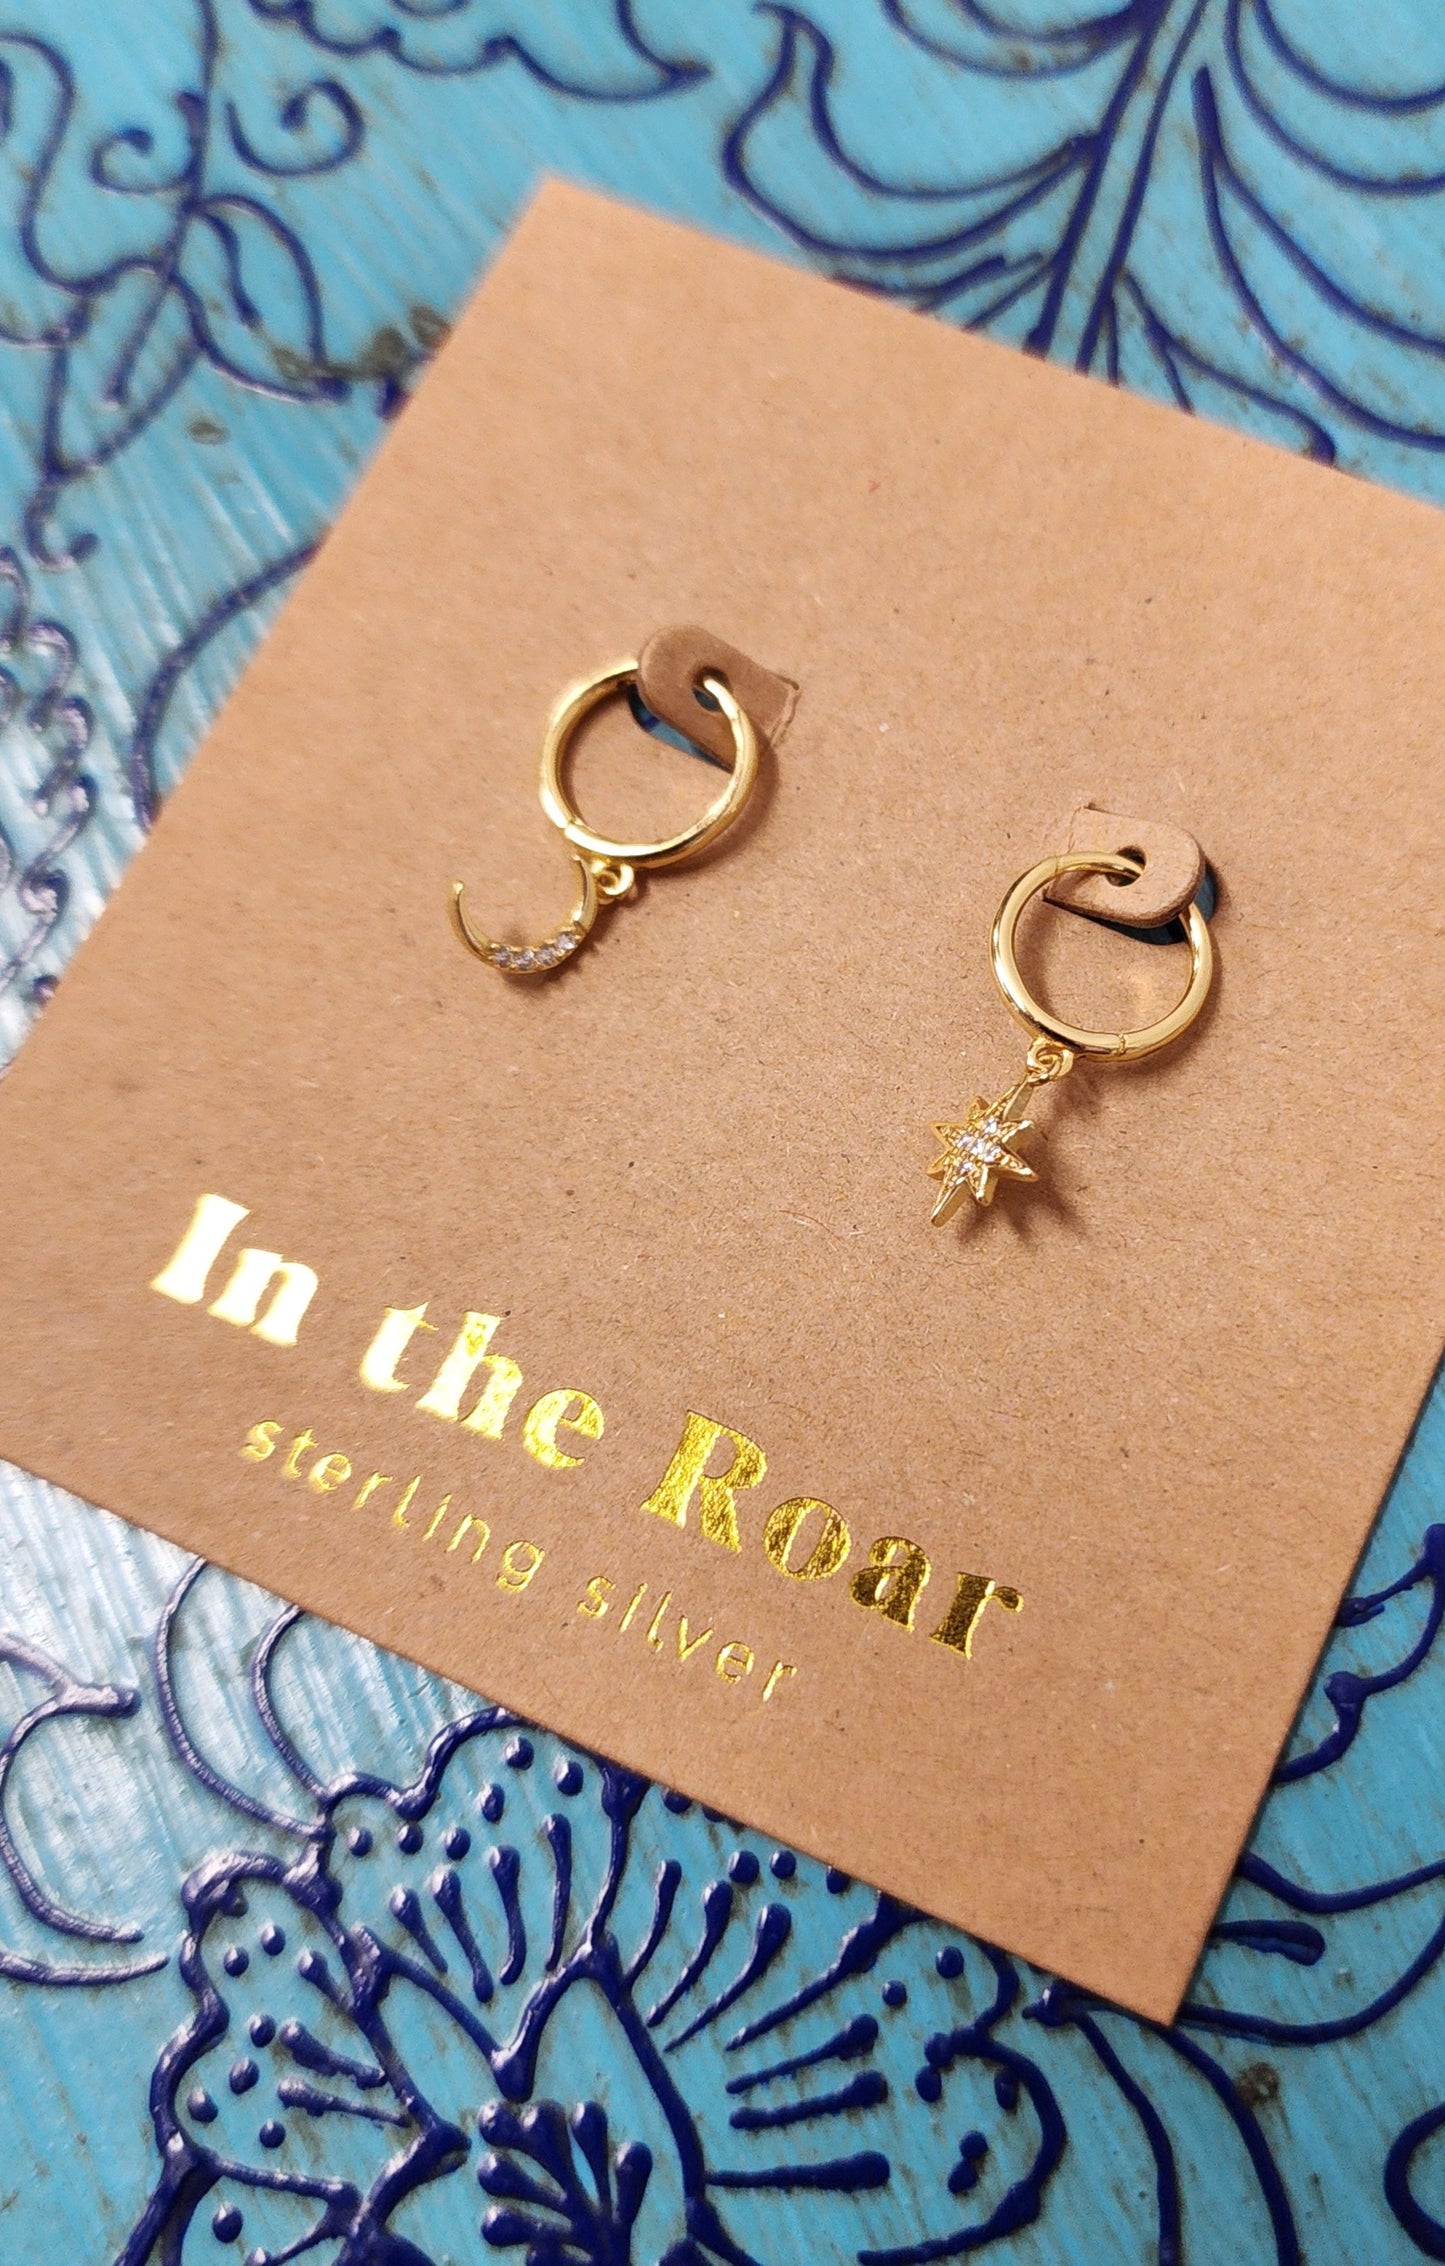 In the Roar-Huggies-Gold plated 925 Sterling Silver/Moon & Star